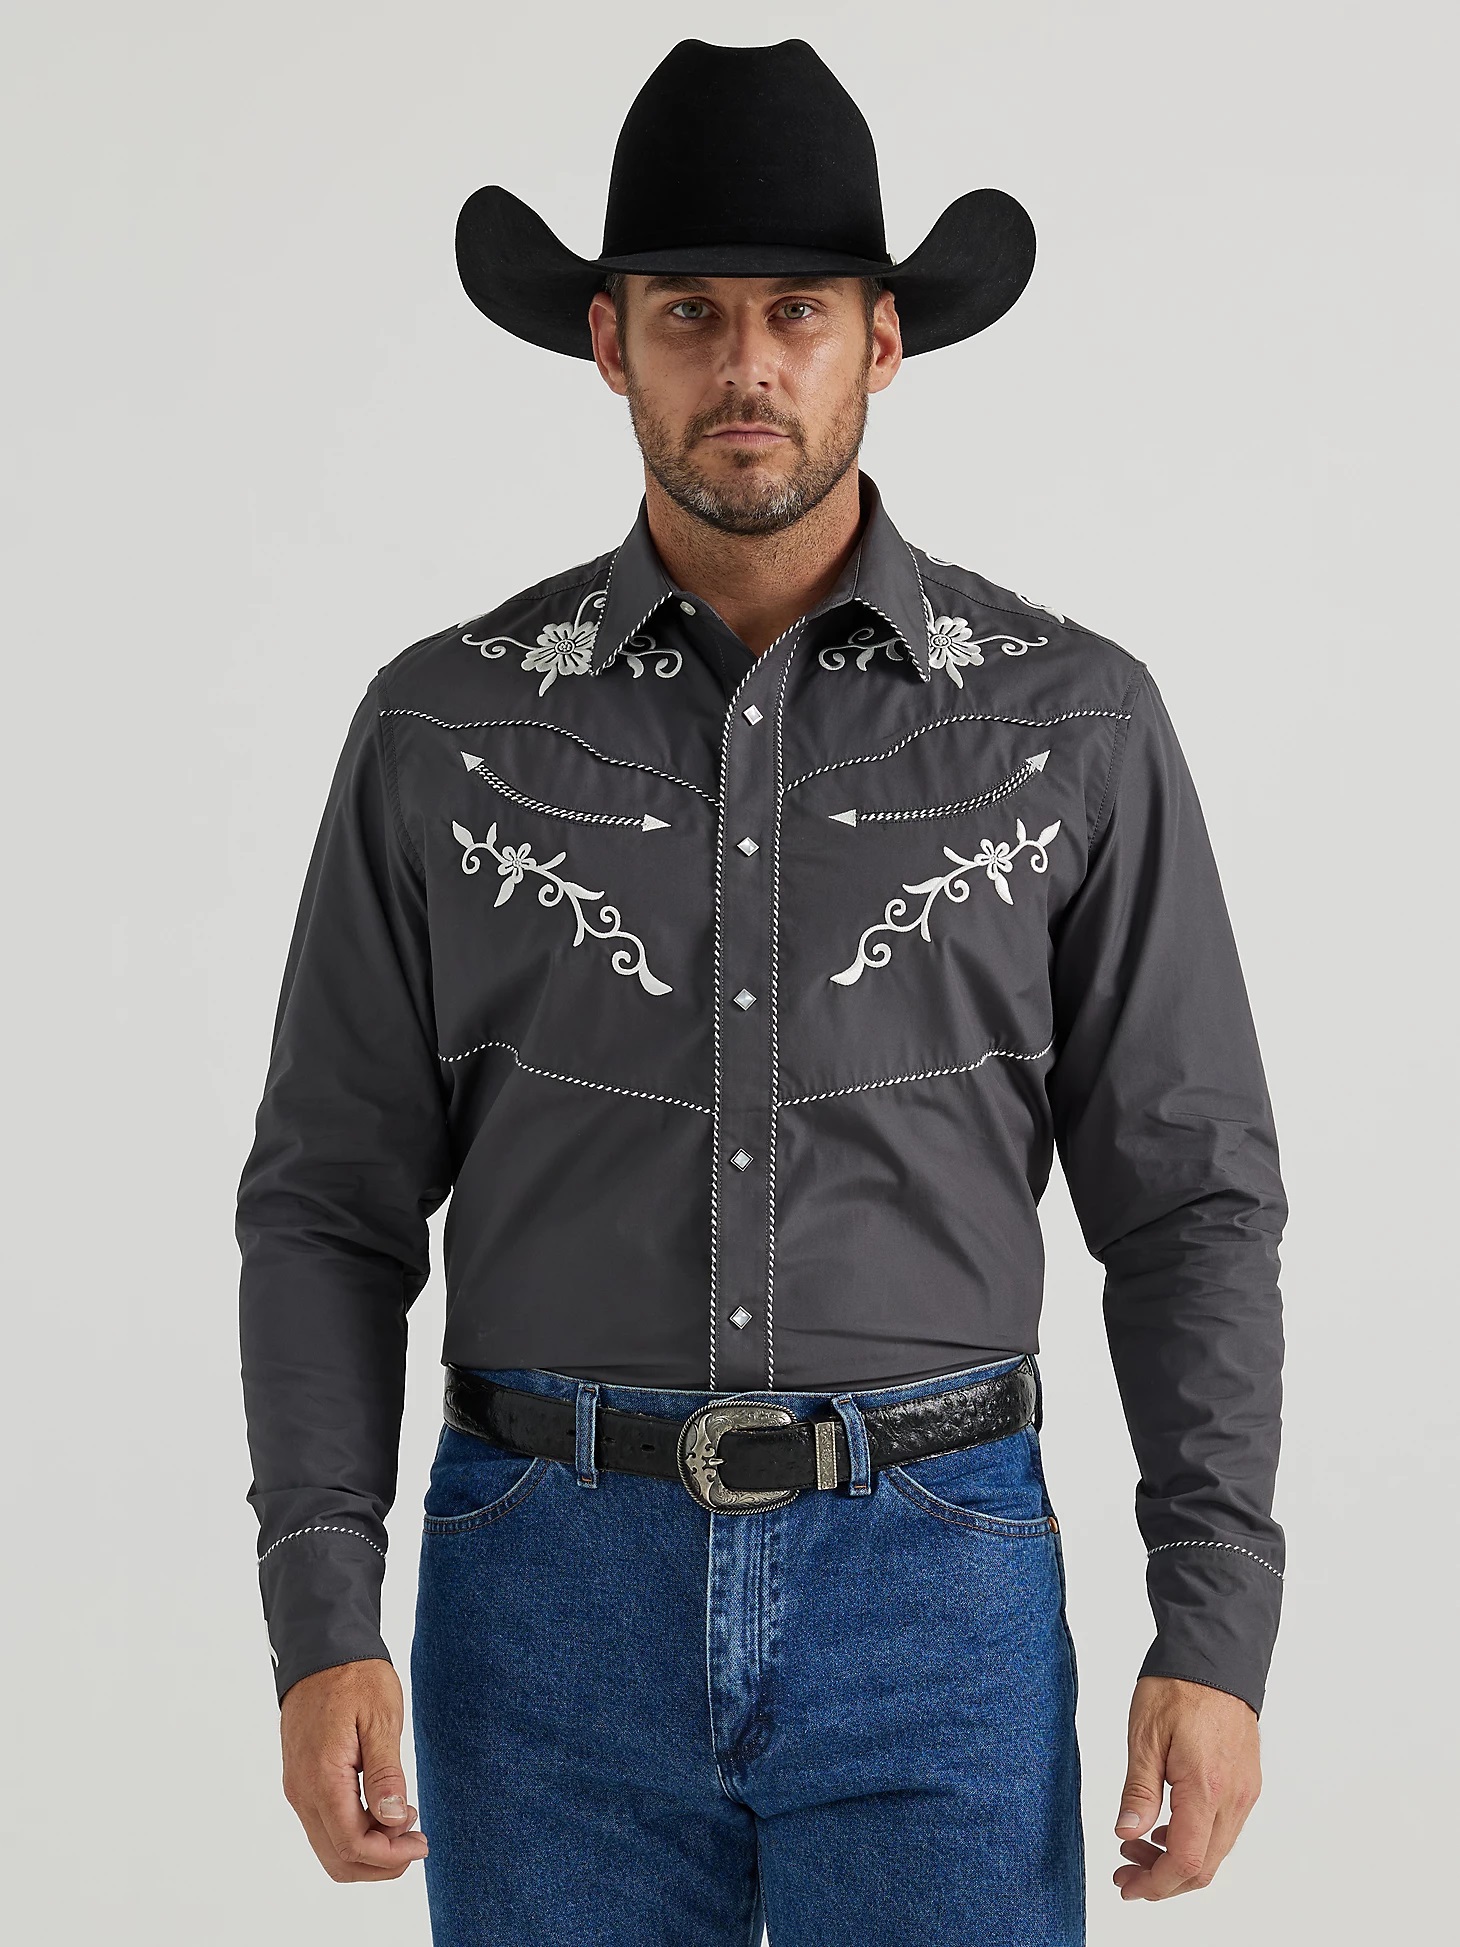 Western shirts are back in style: Here's our top 5 picks - The Manual